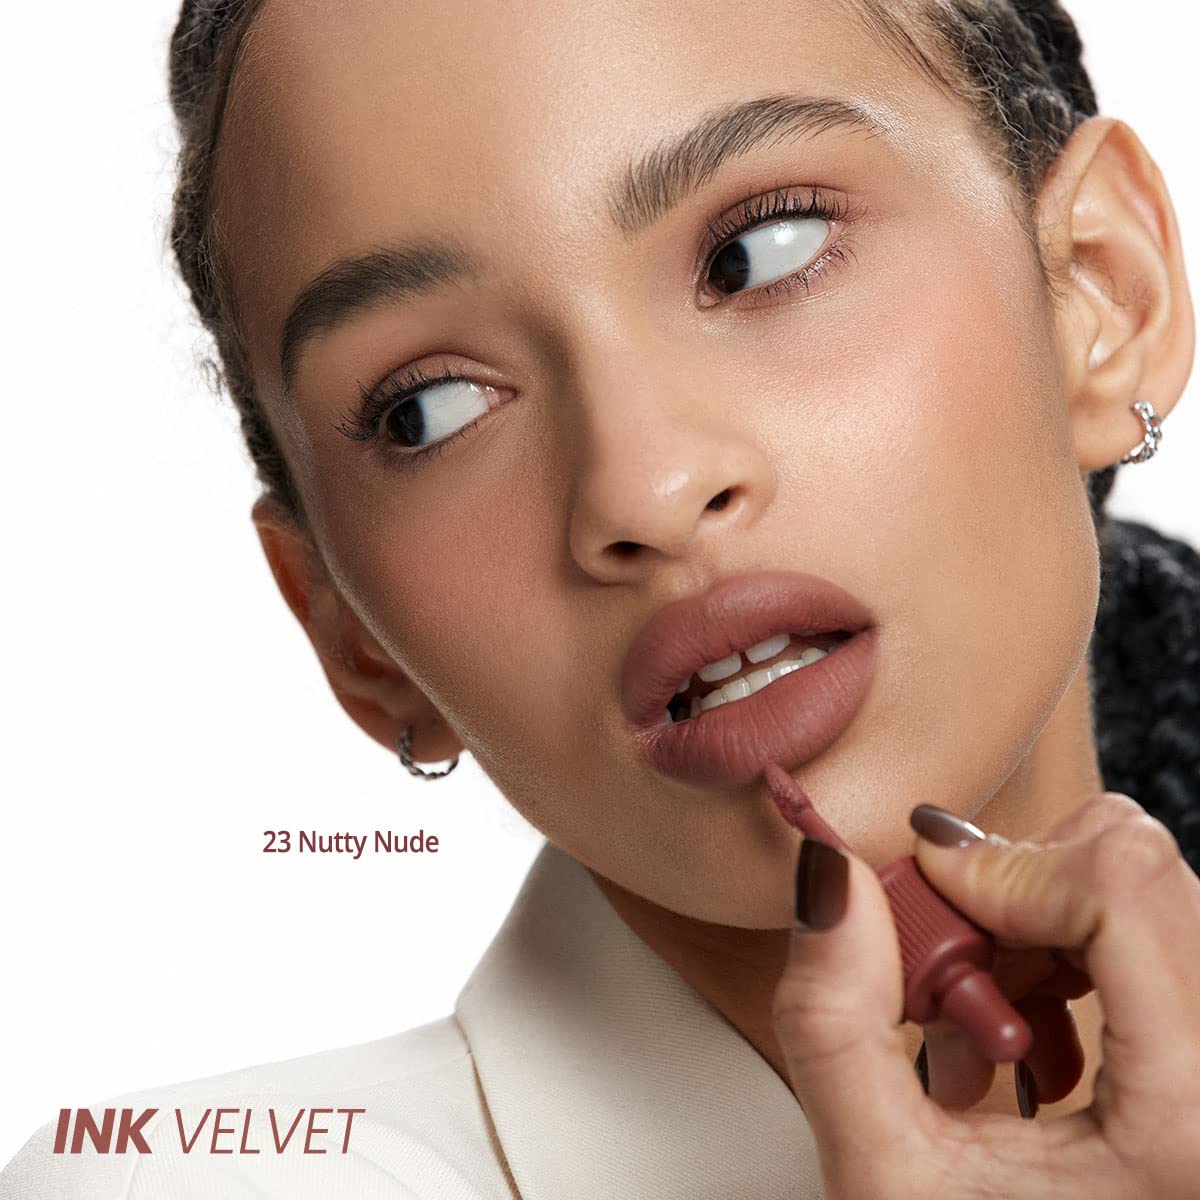 Peripera Ink the Velvet Lip Tint | High Pigment Color, Longwear, Weightless, Not Animal Tested, Gluten-Free, Paraben-Free | NICE TO MEET NUDE, 0.14 fl oz*3